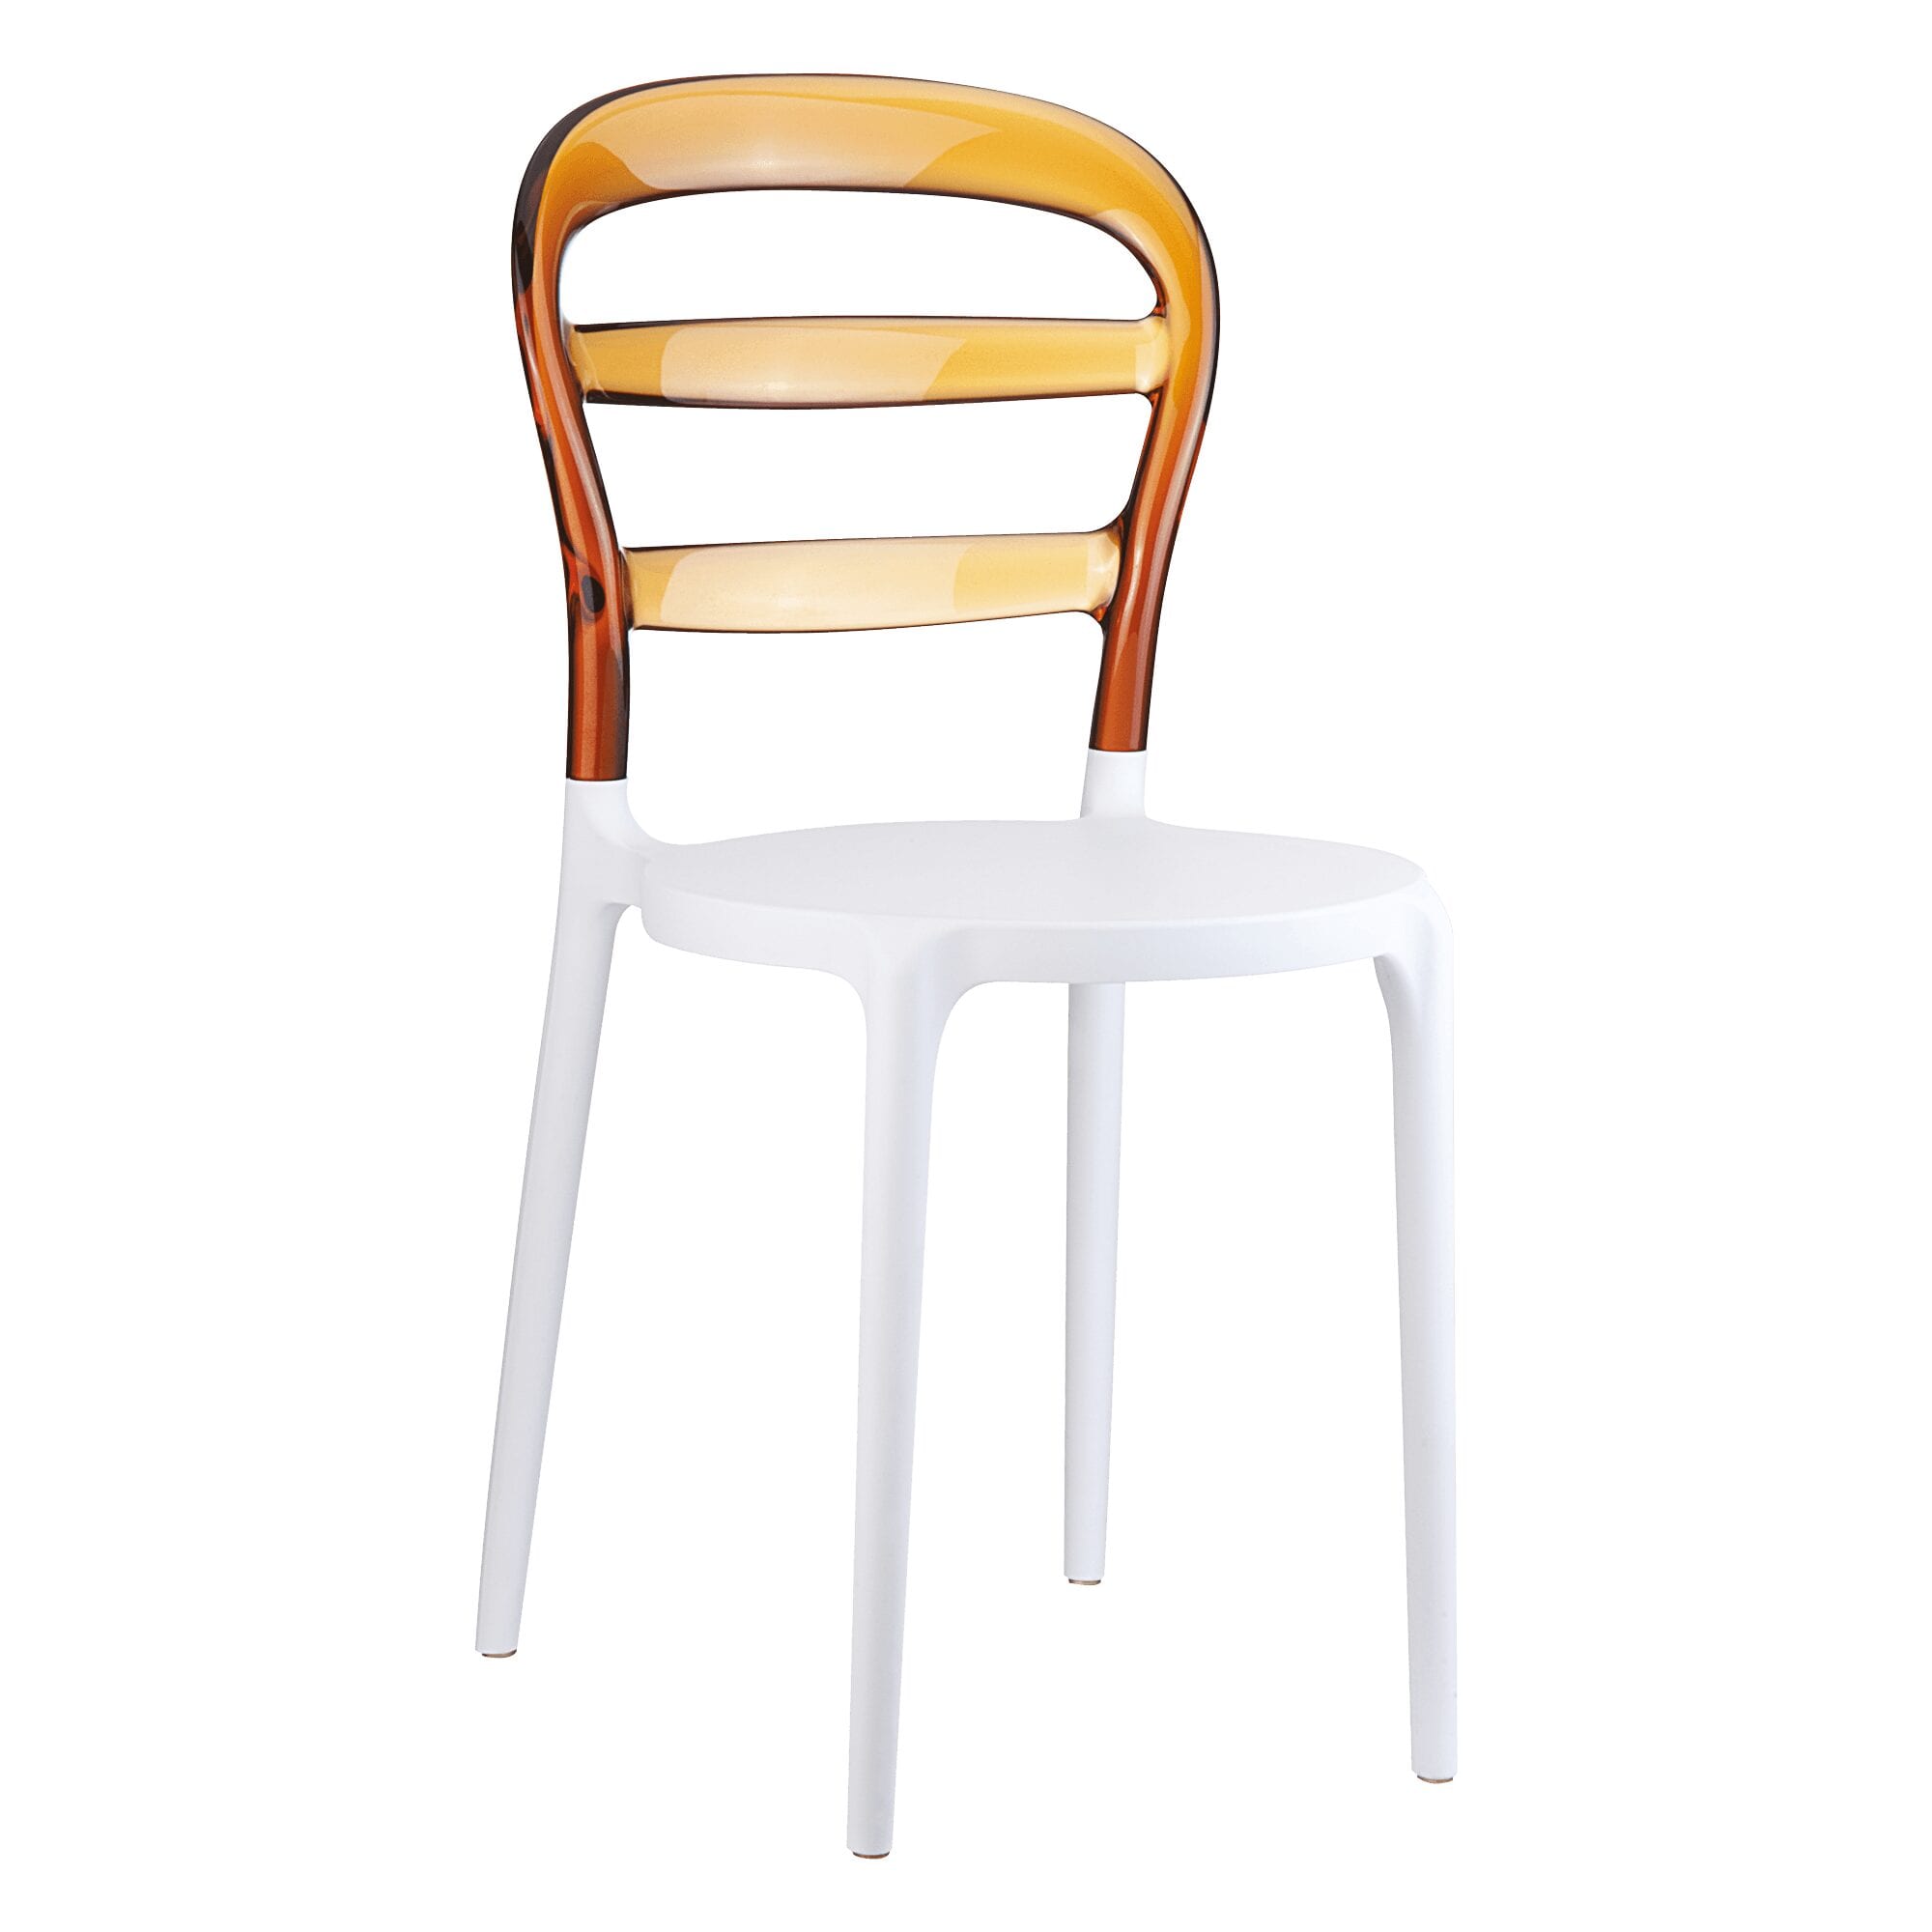 Tribi Stacking Side Chair - White/Amber Transparent